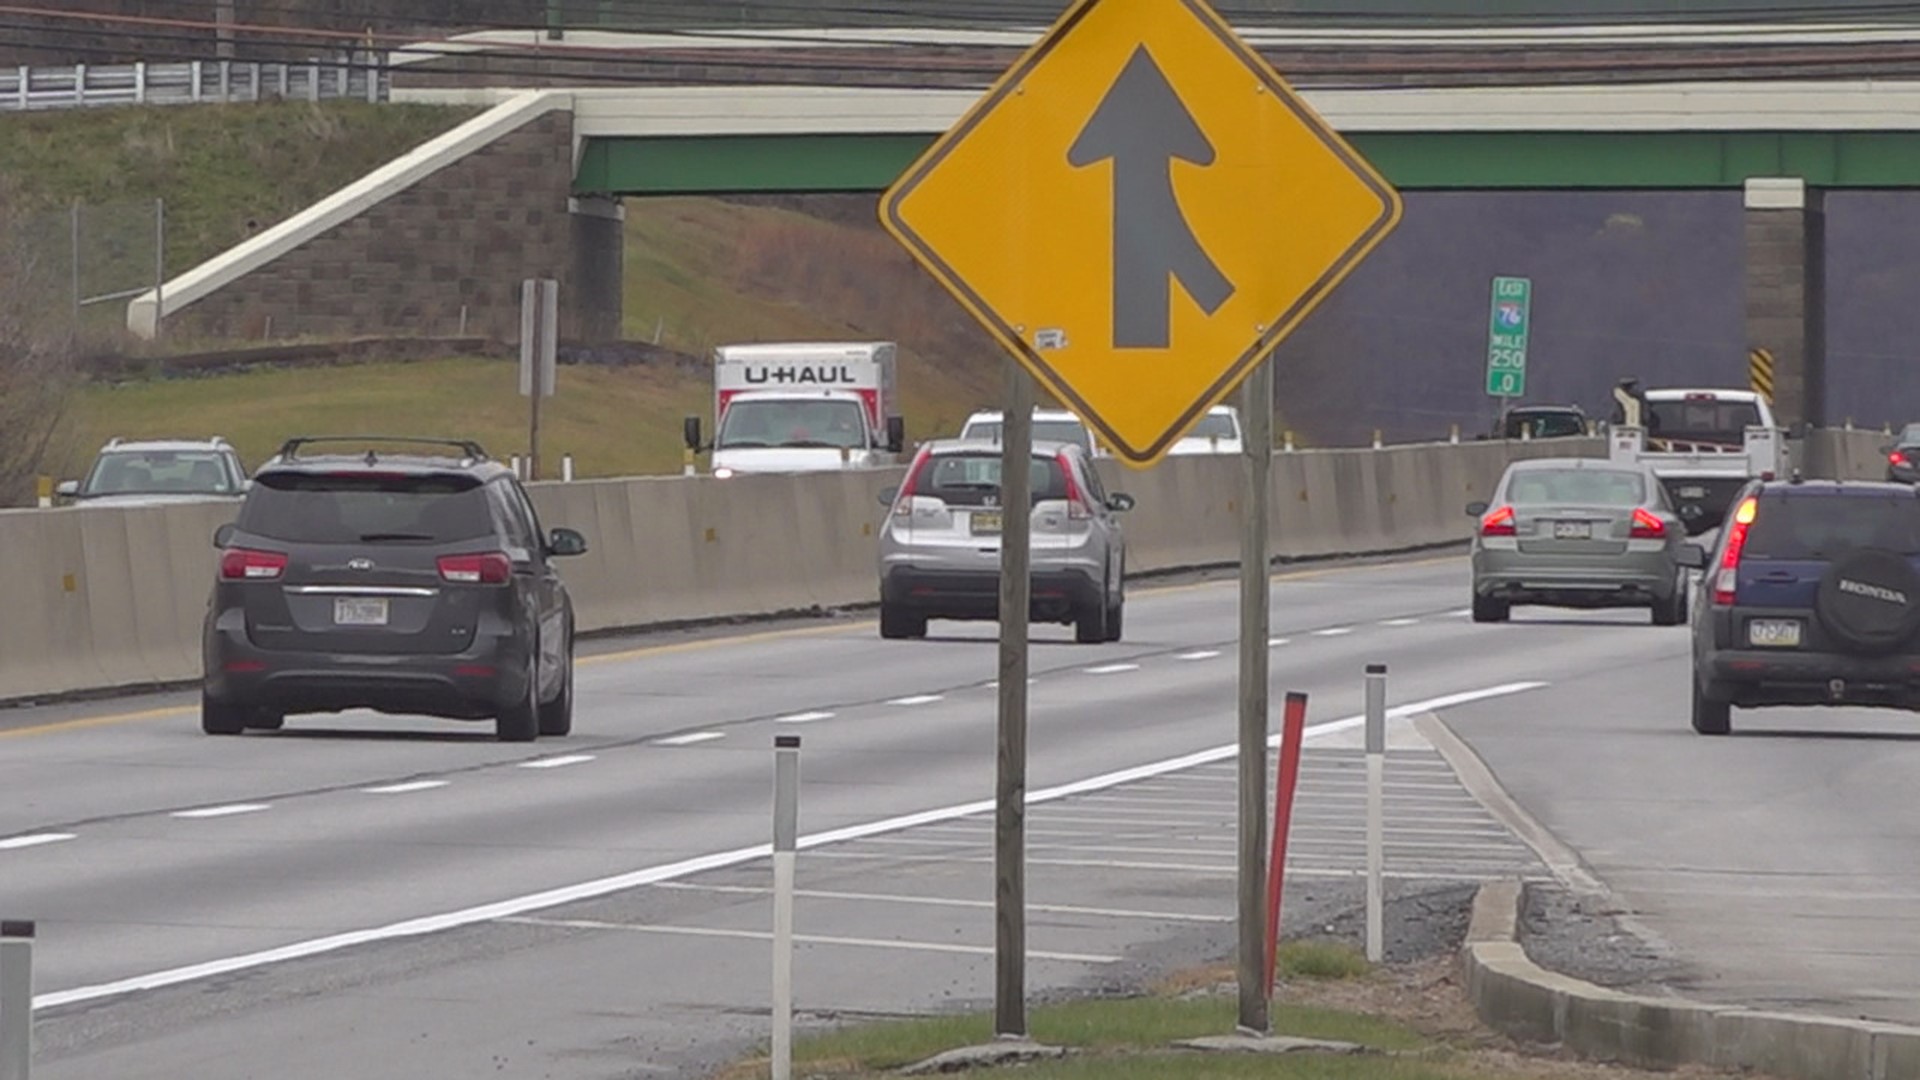 Nearly 700,000 drivers were expected to drive on the Turnpike on Wednesday.